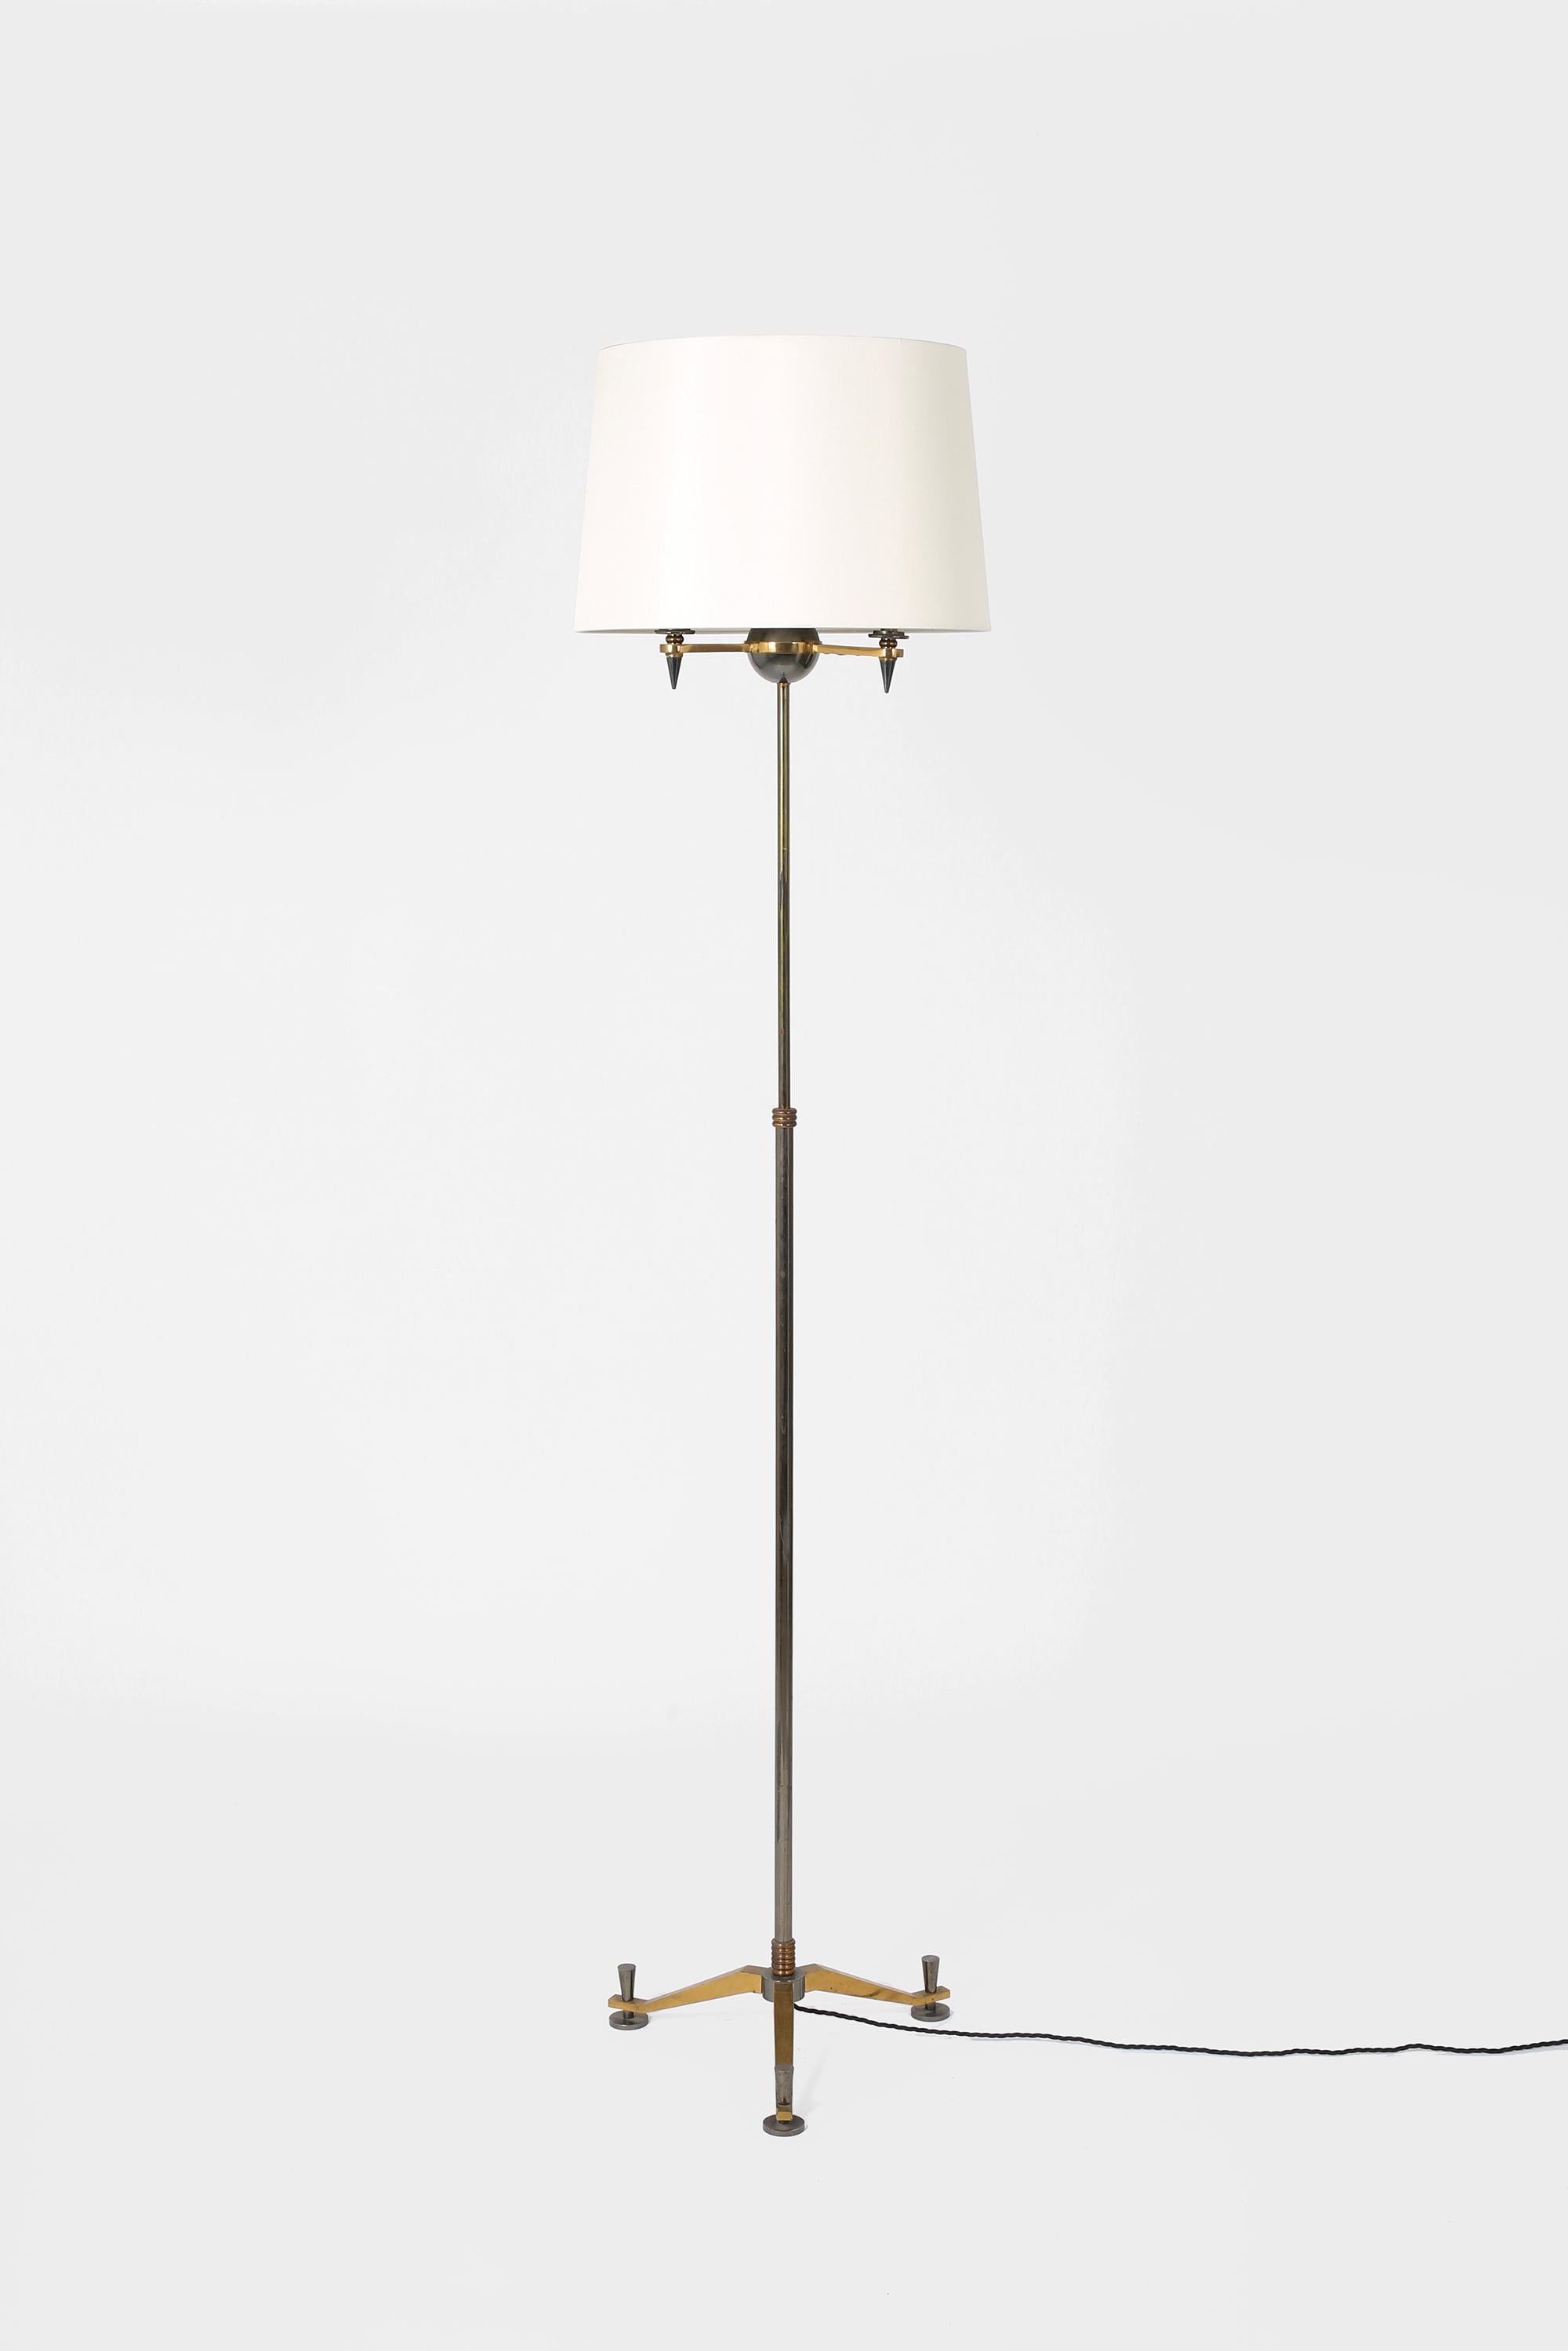 A chic neoclassical floor lamp in bronze and gunmetal by Henri Petitot for Atelier Petitot. French, c. 1930s. Supplied with an off white dupion silk shade.